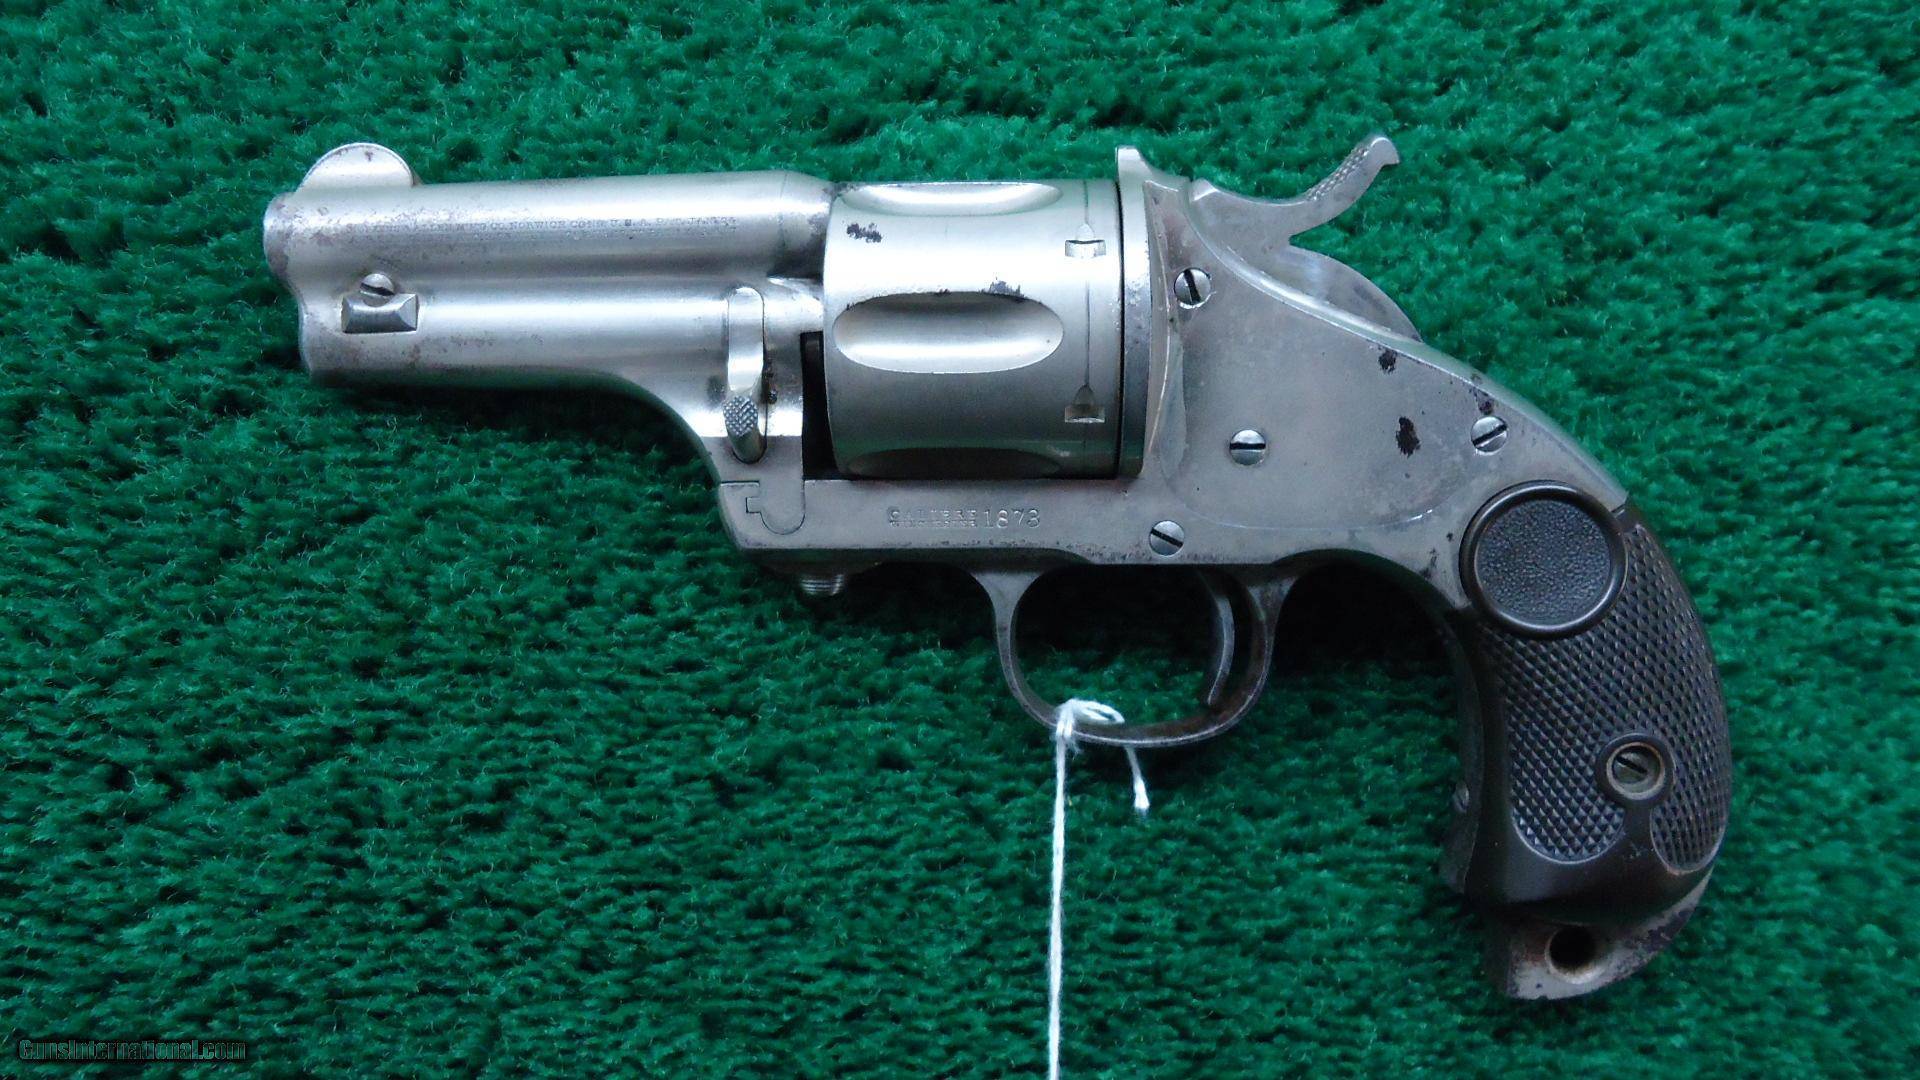 Ugly ducklings, no more merwin, hulbert & co. revolvers finally get respect as sought-after examples of old west hardware.